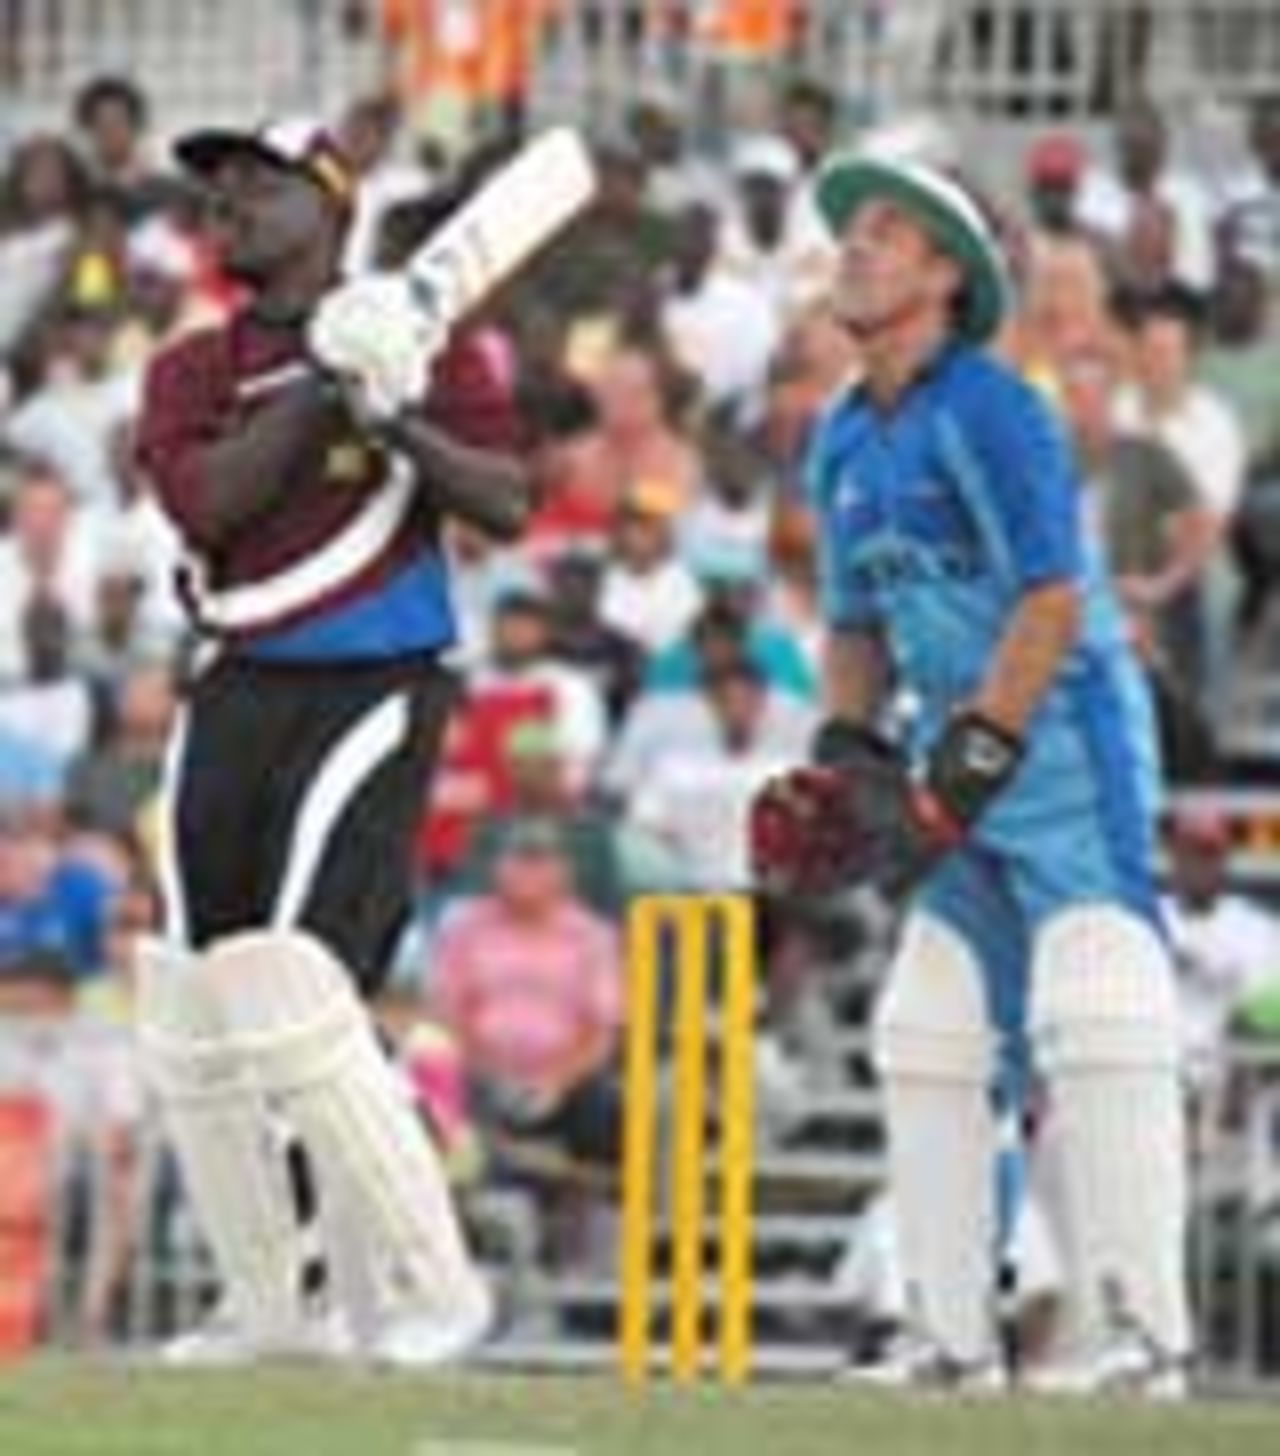 Collis King smashes a six as Alec Stewart watches on at the opening of the new Kensington Oval, West Indies All Stars v World XI, Barbados, February 17, 2007